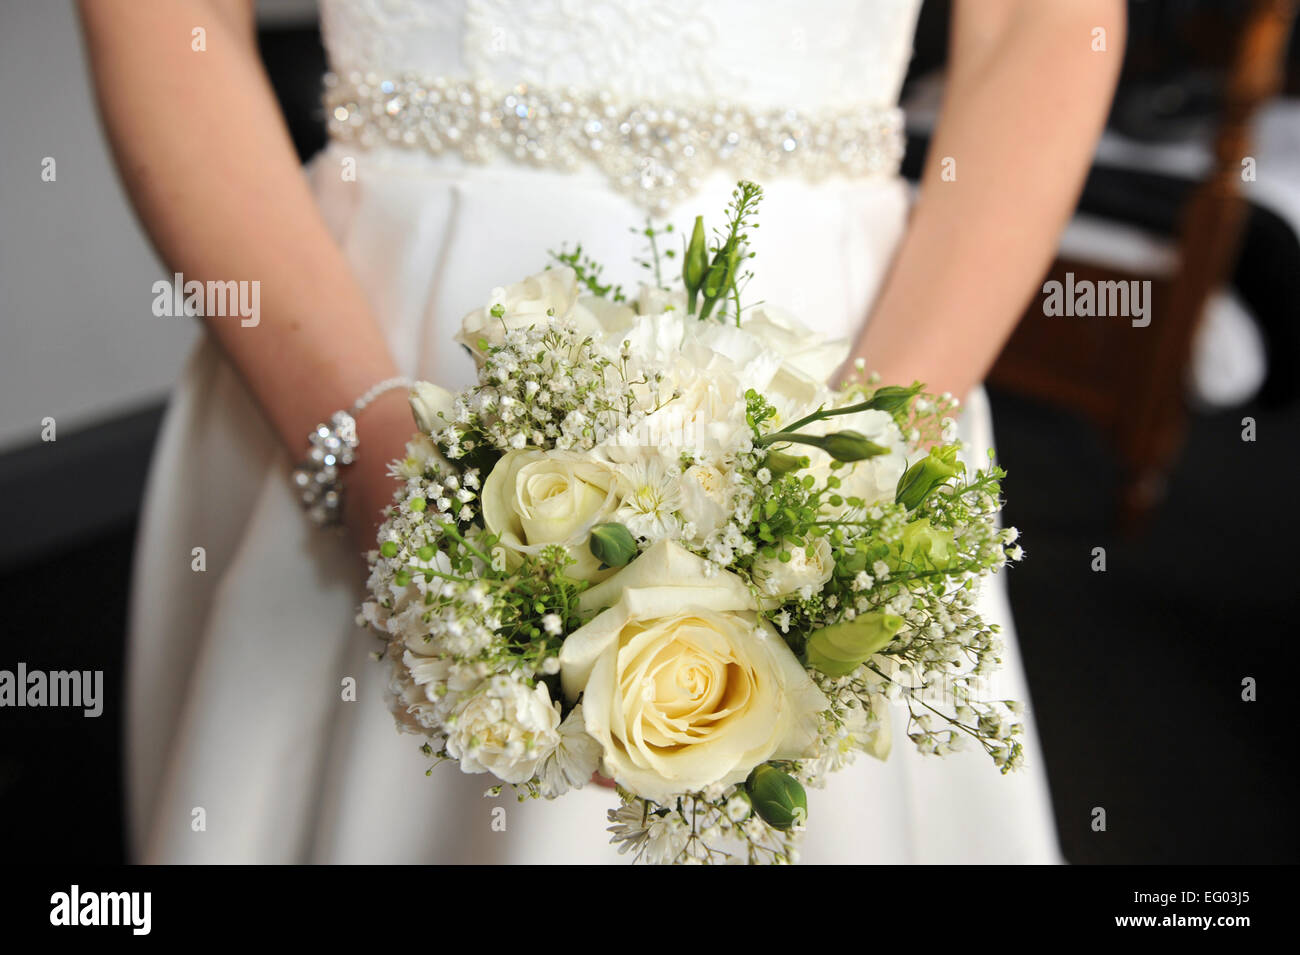 Bridal bouquet with white roses. Stock Photo